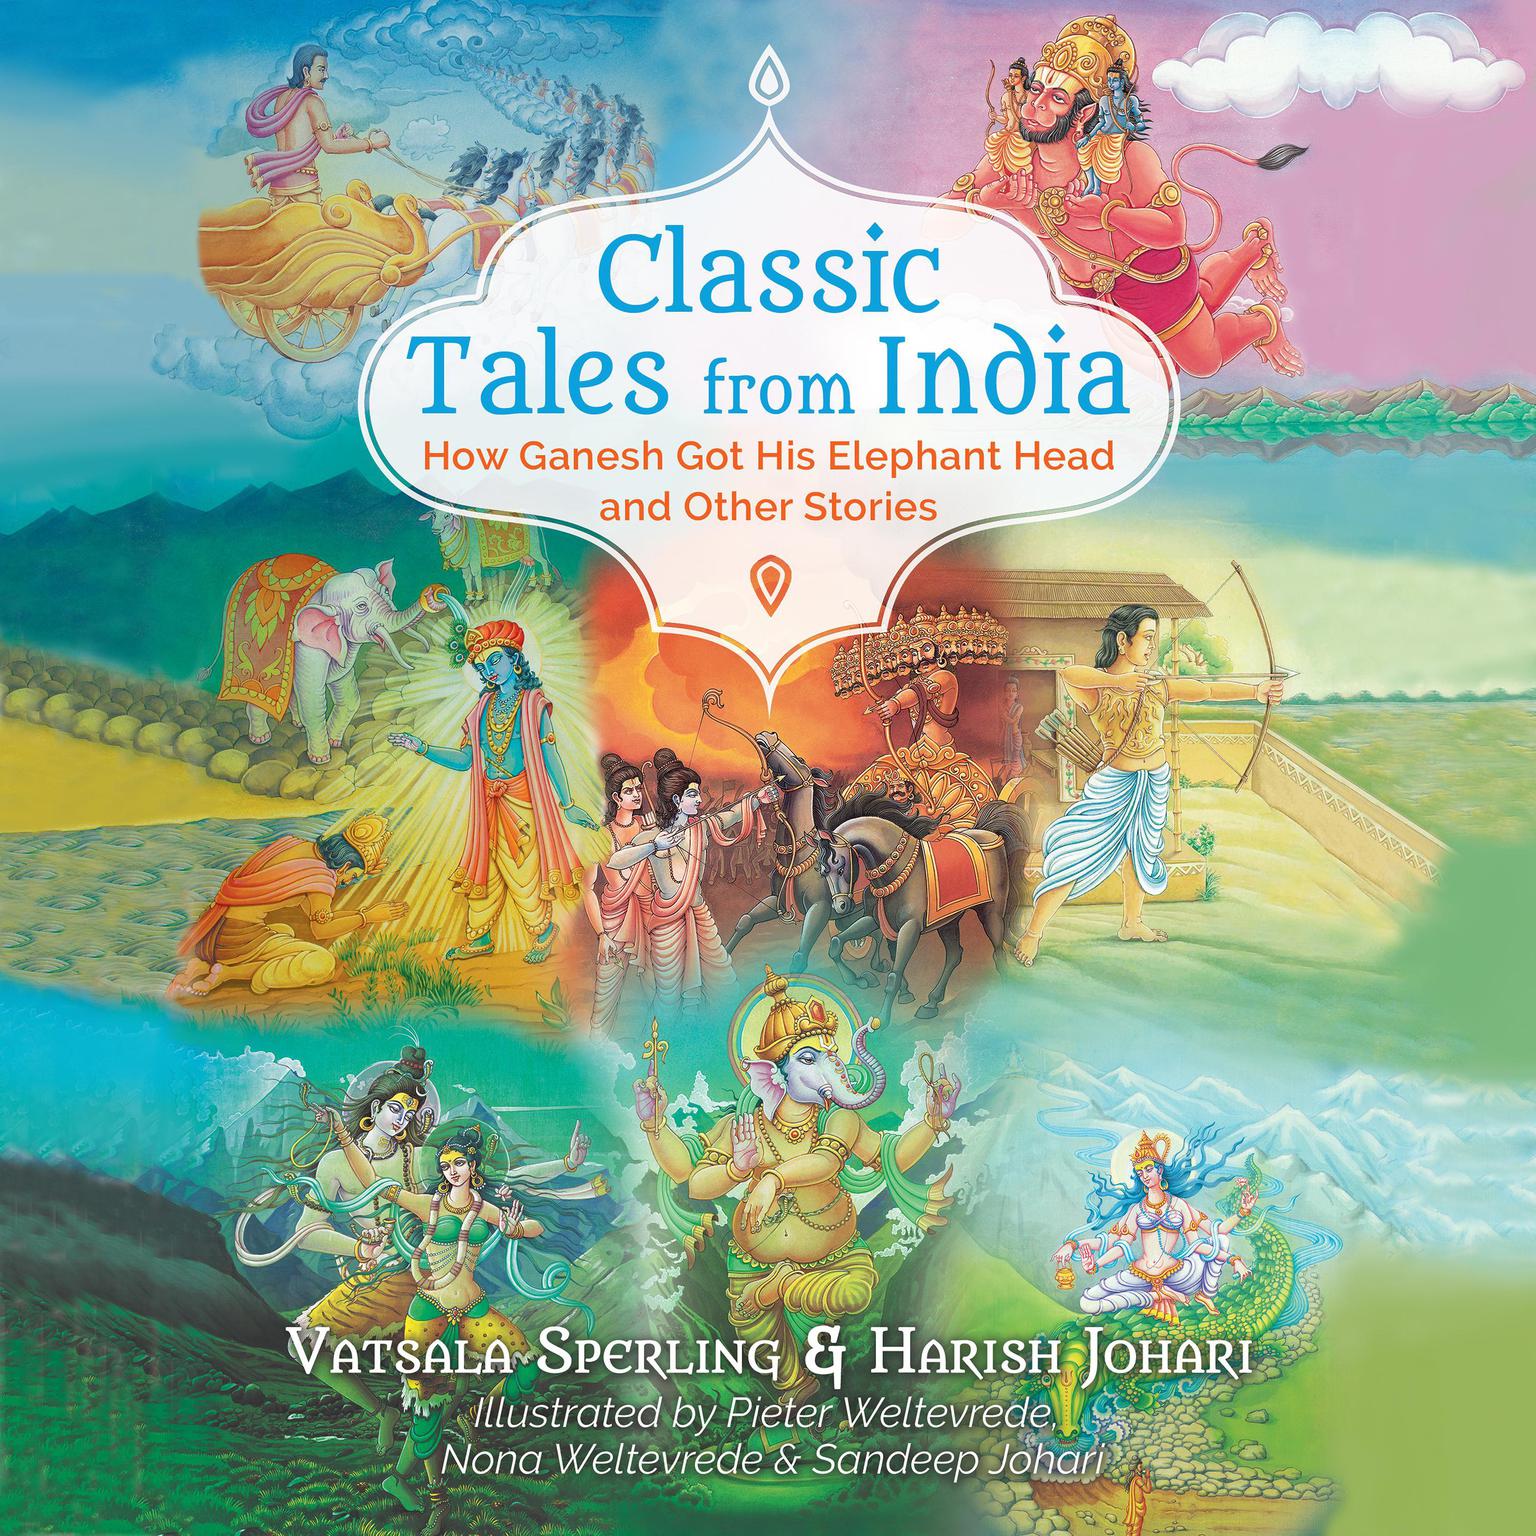 Classic Tales from India: How Ganesh Got His Elephant Head and Other Stories Audiobook, by Vatsala Sperling